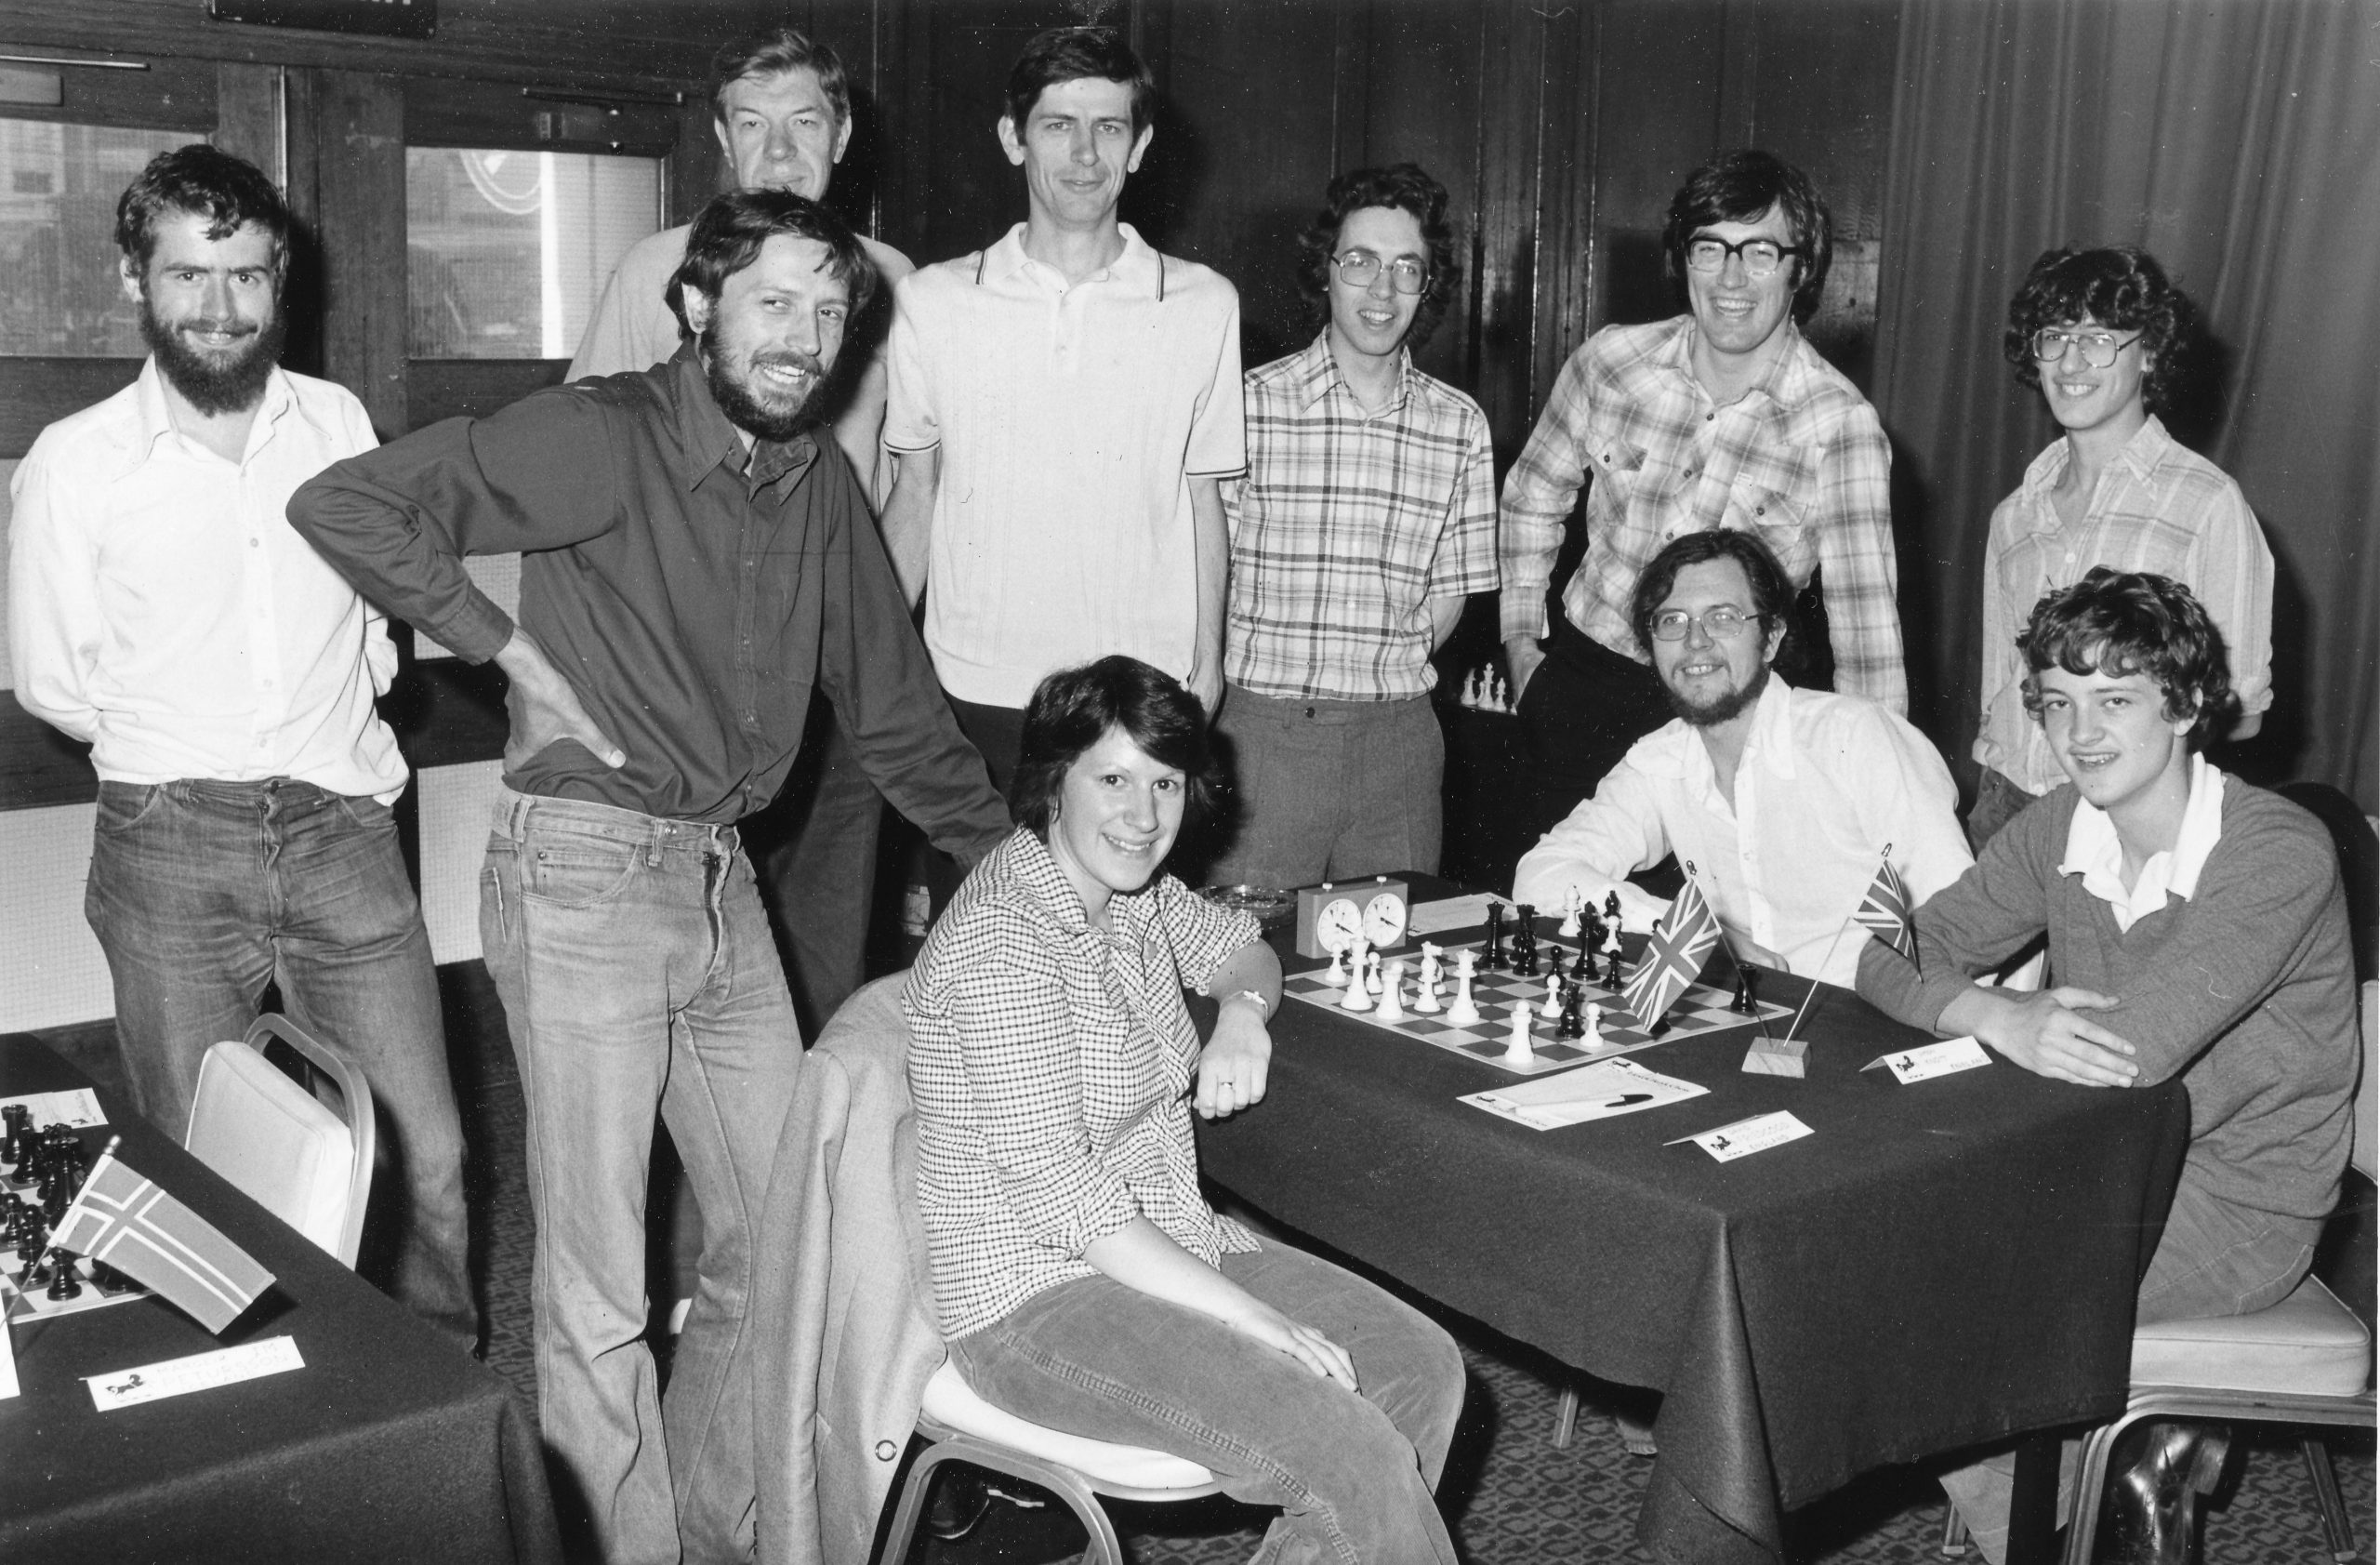 Paul Littlewood and friends during the 1978 Lloyds Bank Masters